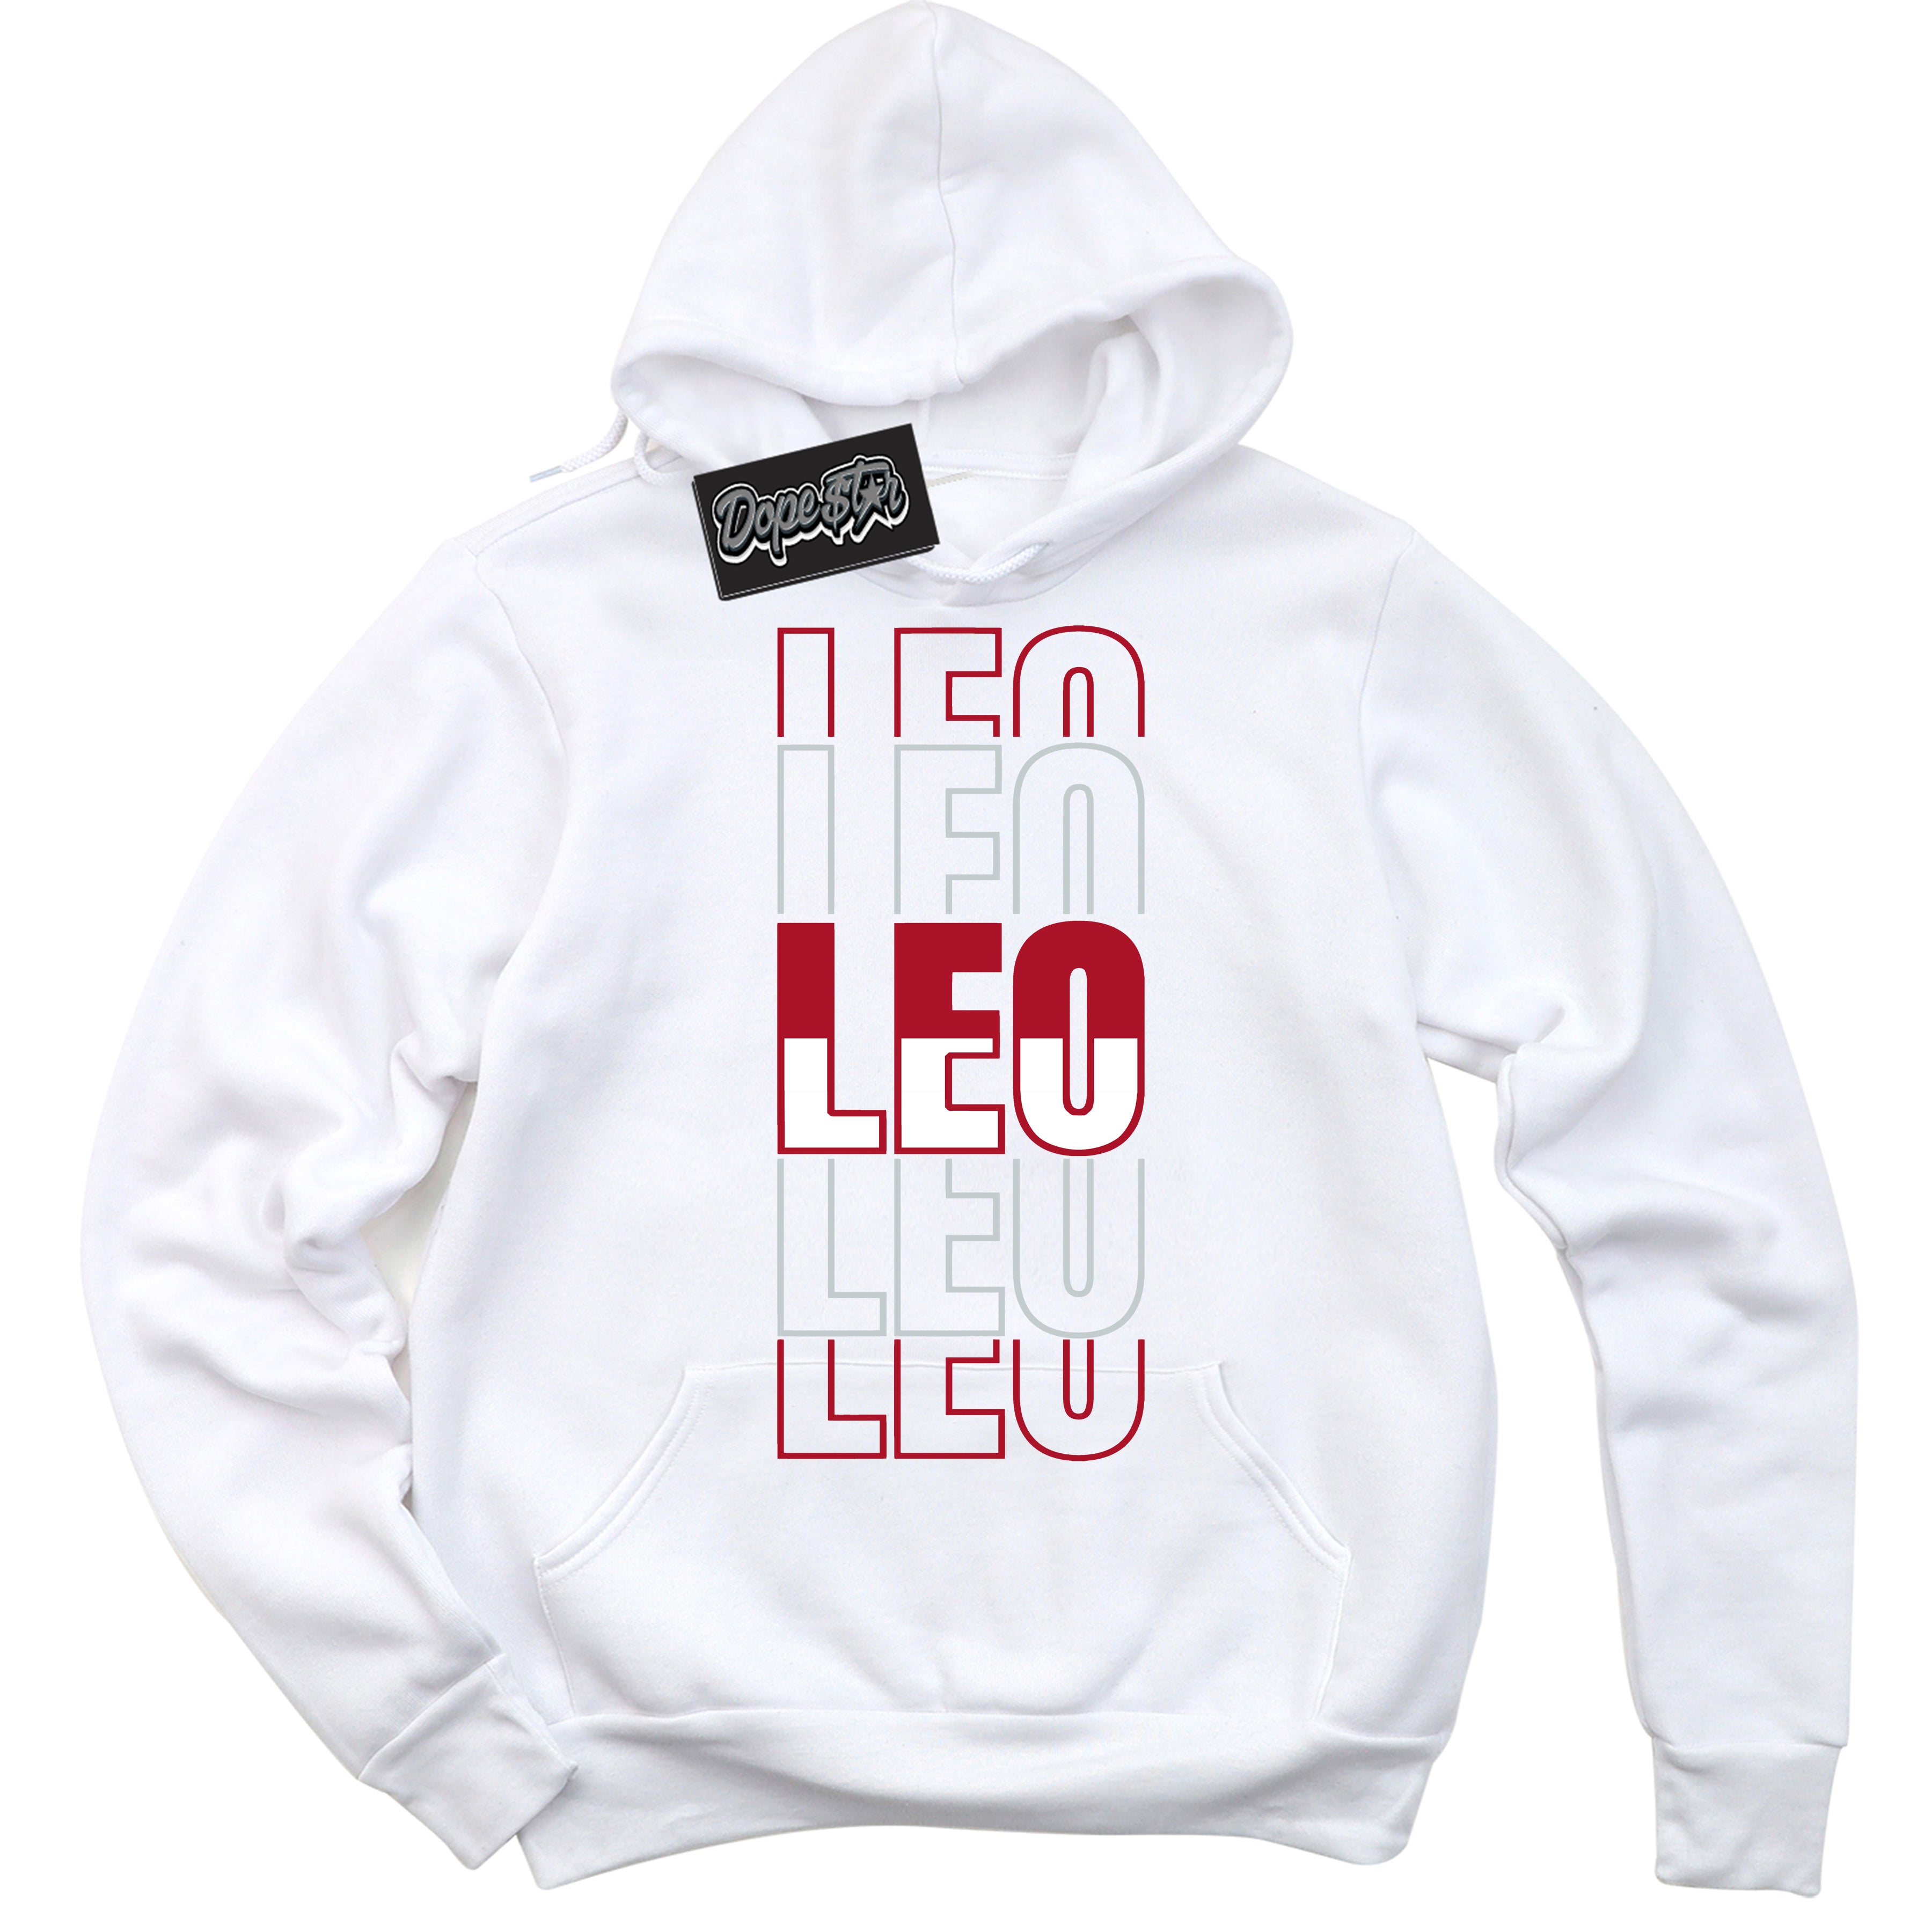 Cool Black Hoodie with “ Leo ”  design that Perfectly Matches  Reverse Ultraman Sneakers.